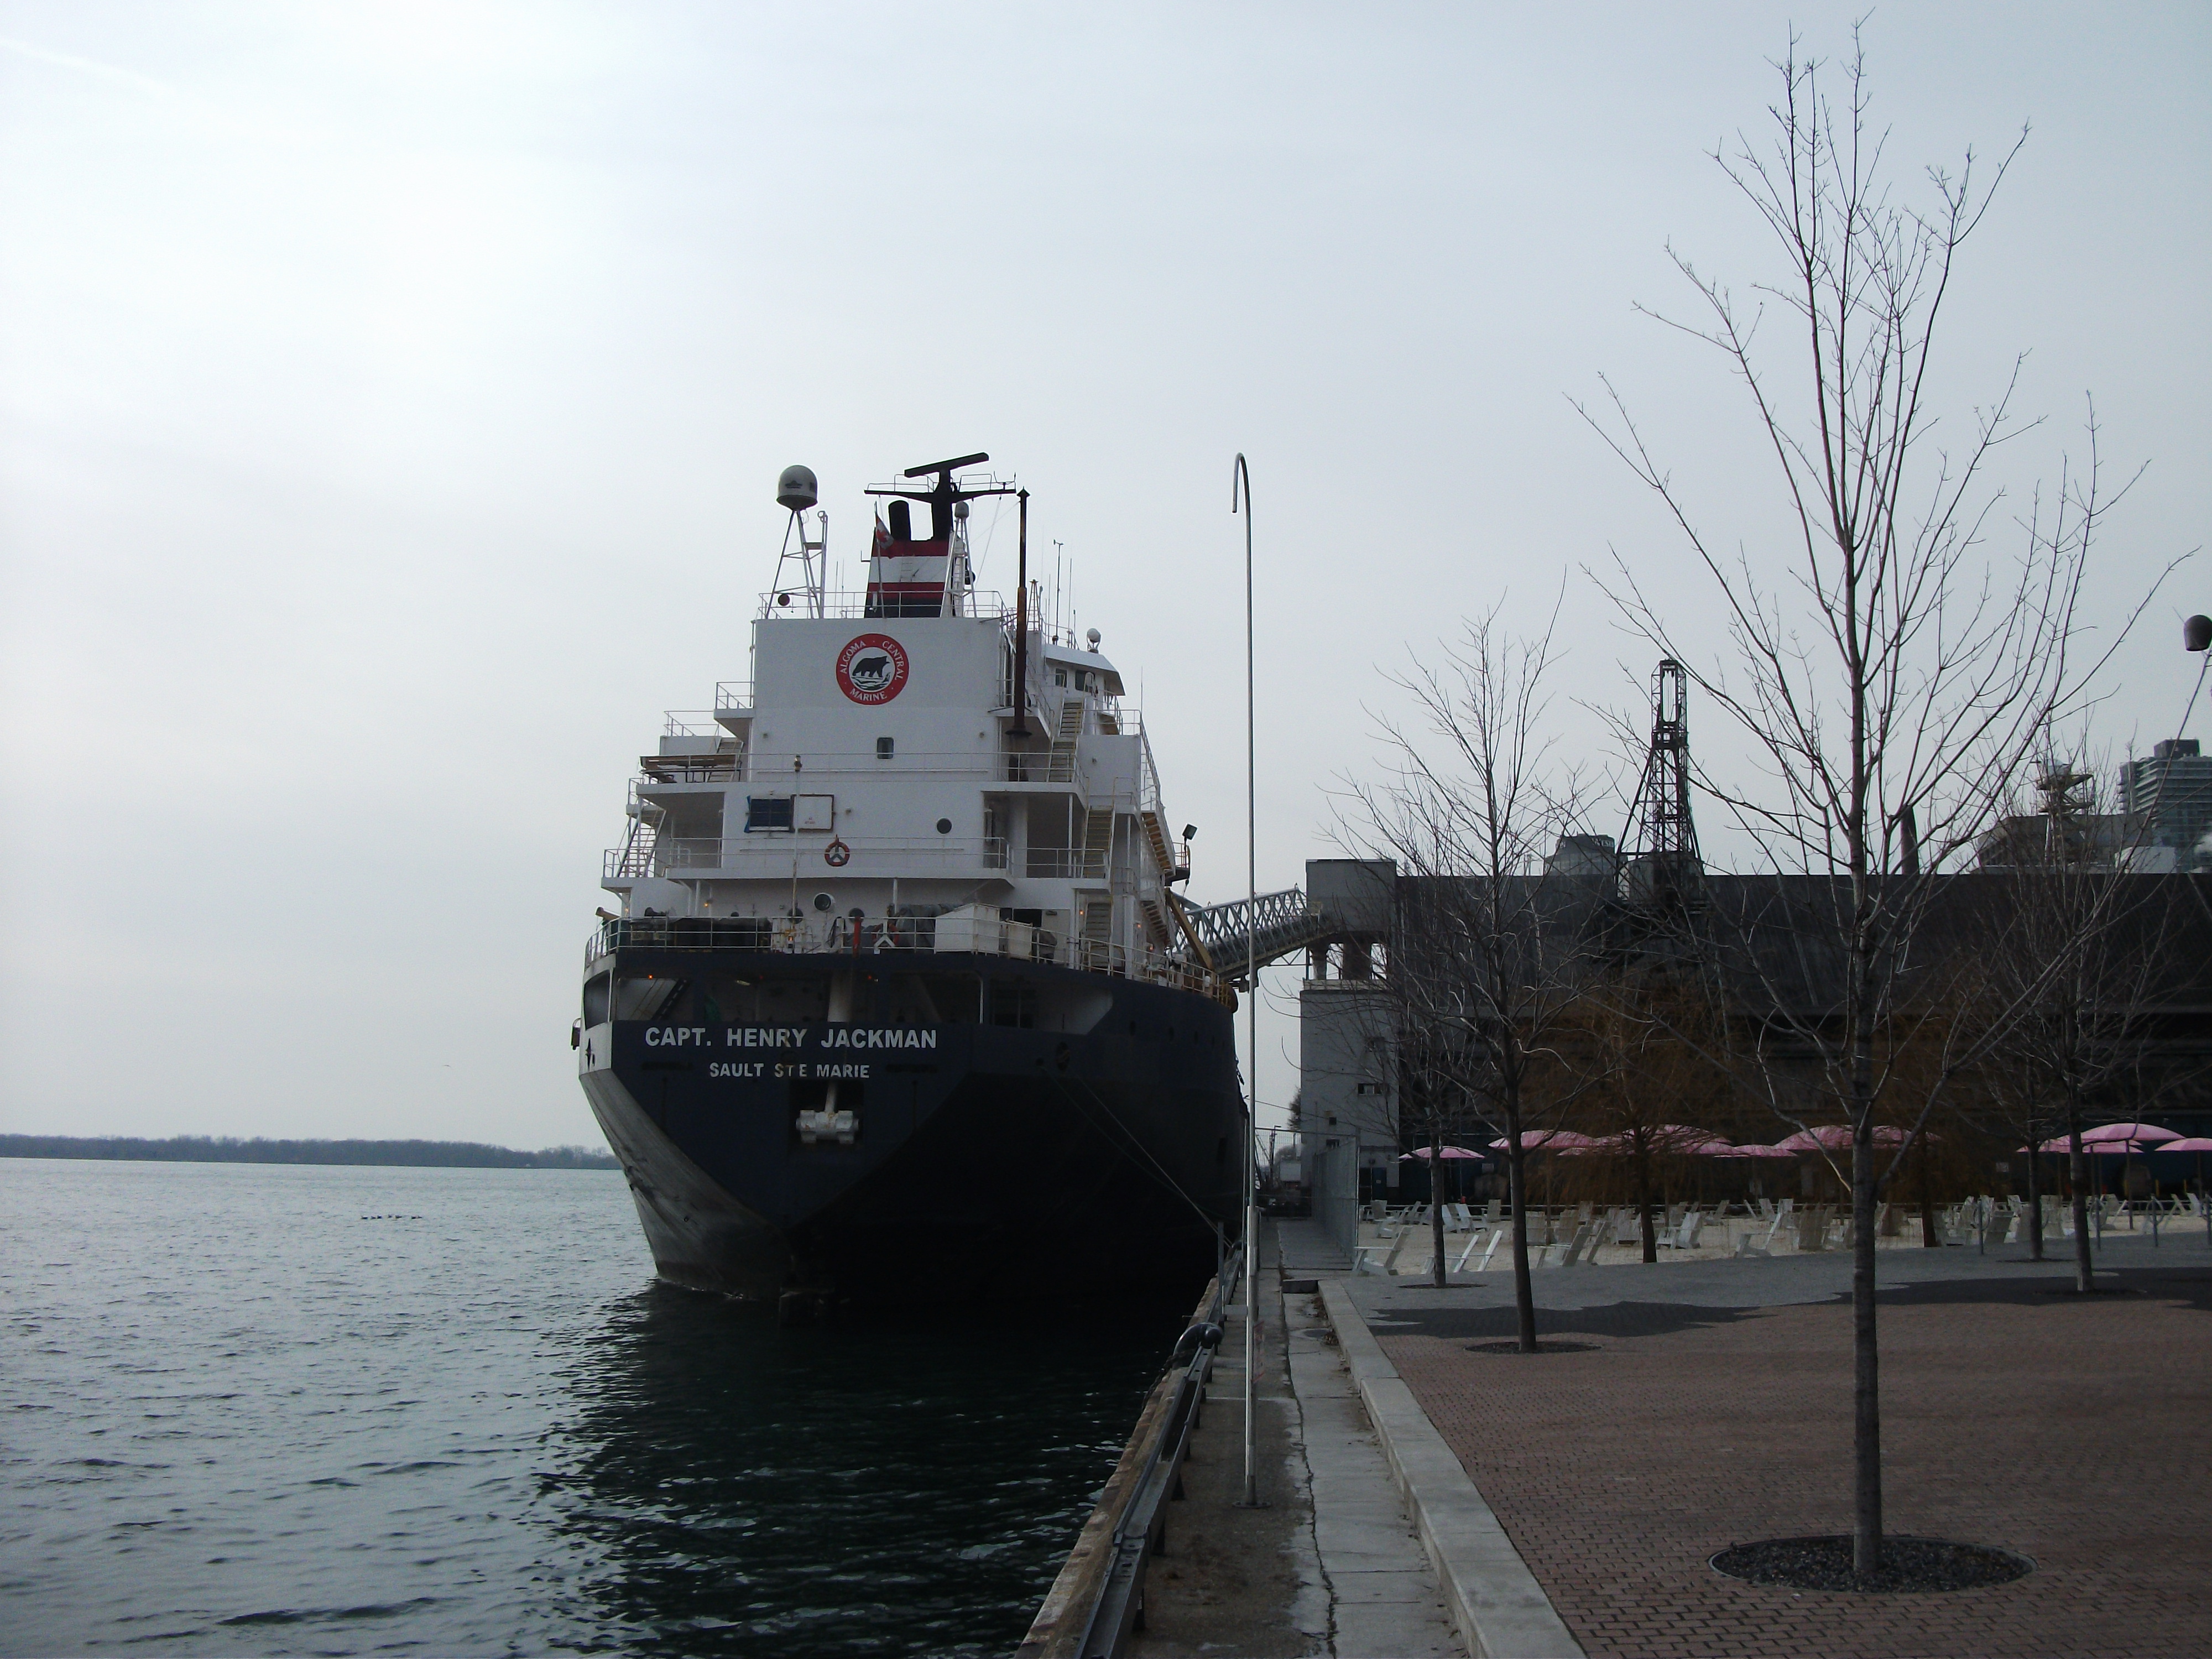 Bulk carrier Captain Henry Jackman unloading raw sugar at the Redpath sugar refinery in Toronto, 2011-12-22